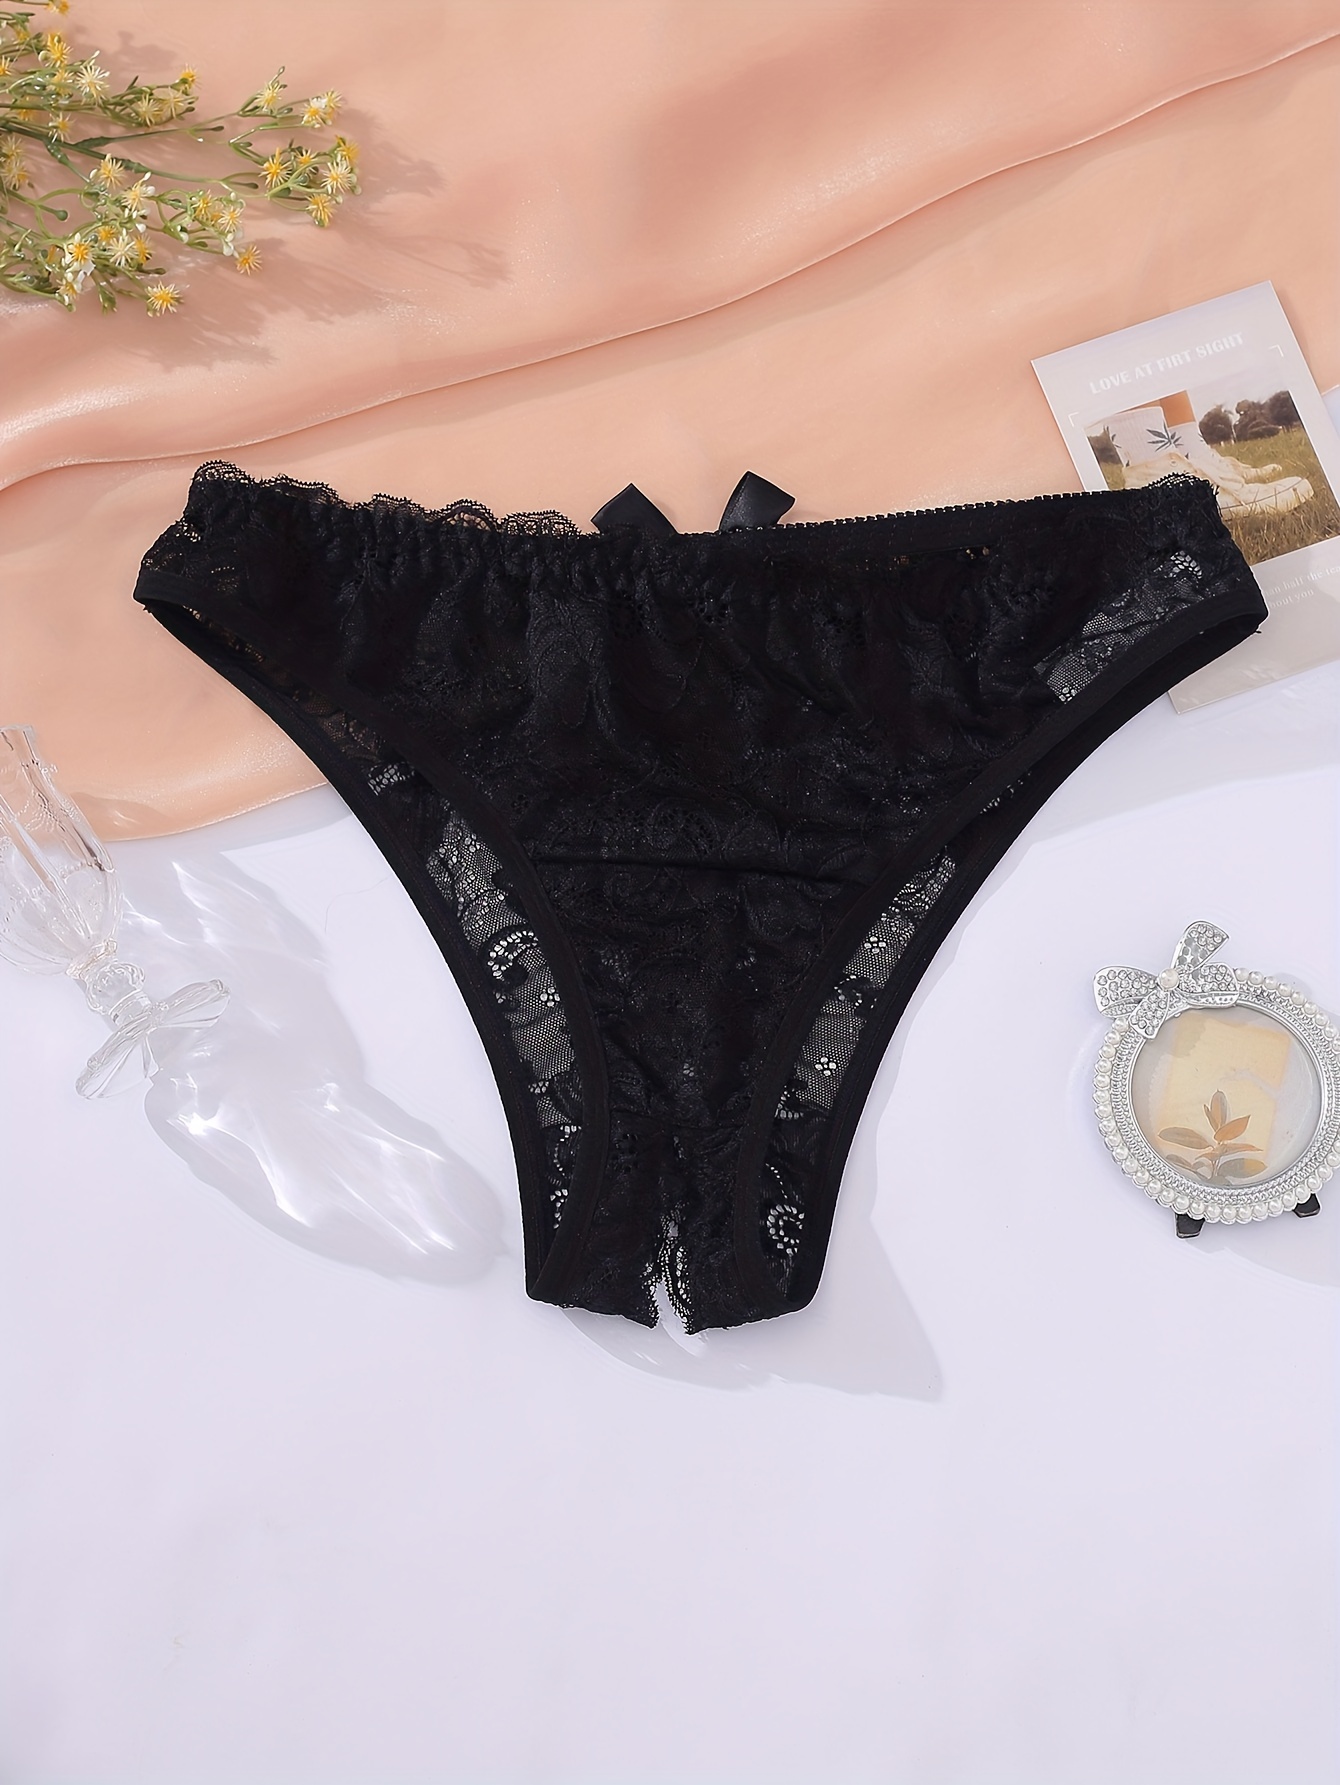  Open Crotch G-String for Women Naughty See Through Mesh Panties  High Waist Tummy_Control Brief Lingerie Lace Panty BK,One Size : Sports &  Outdoors